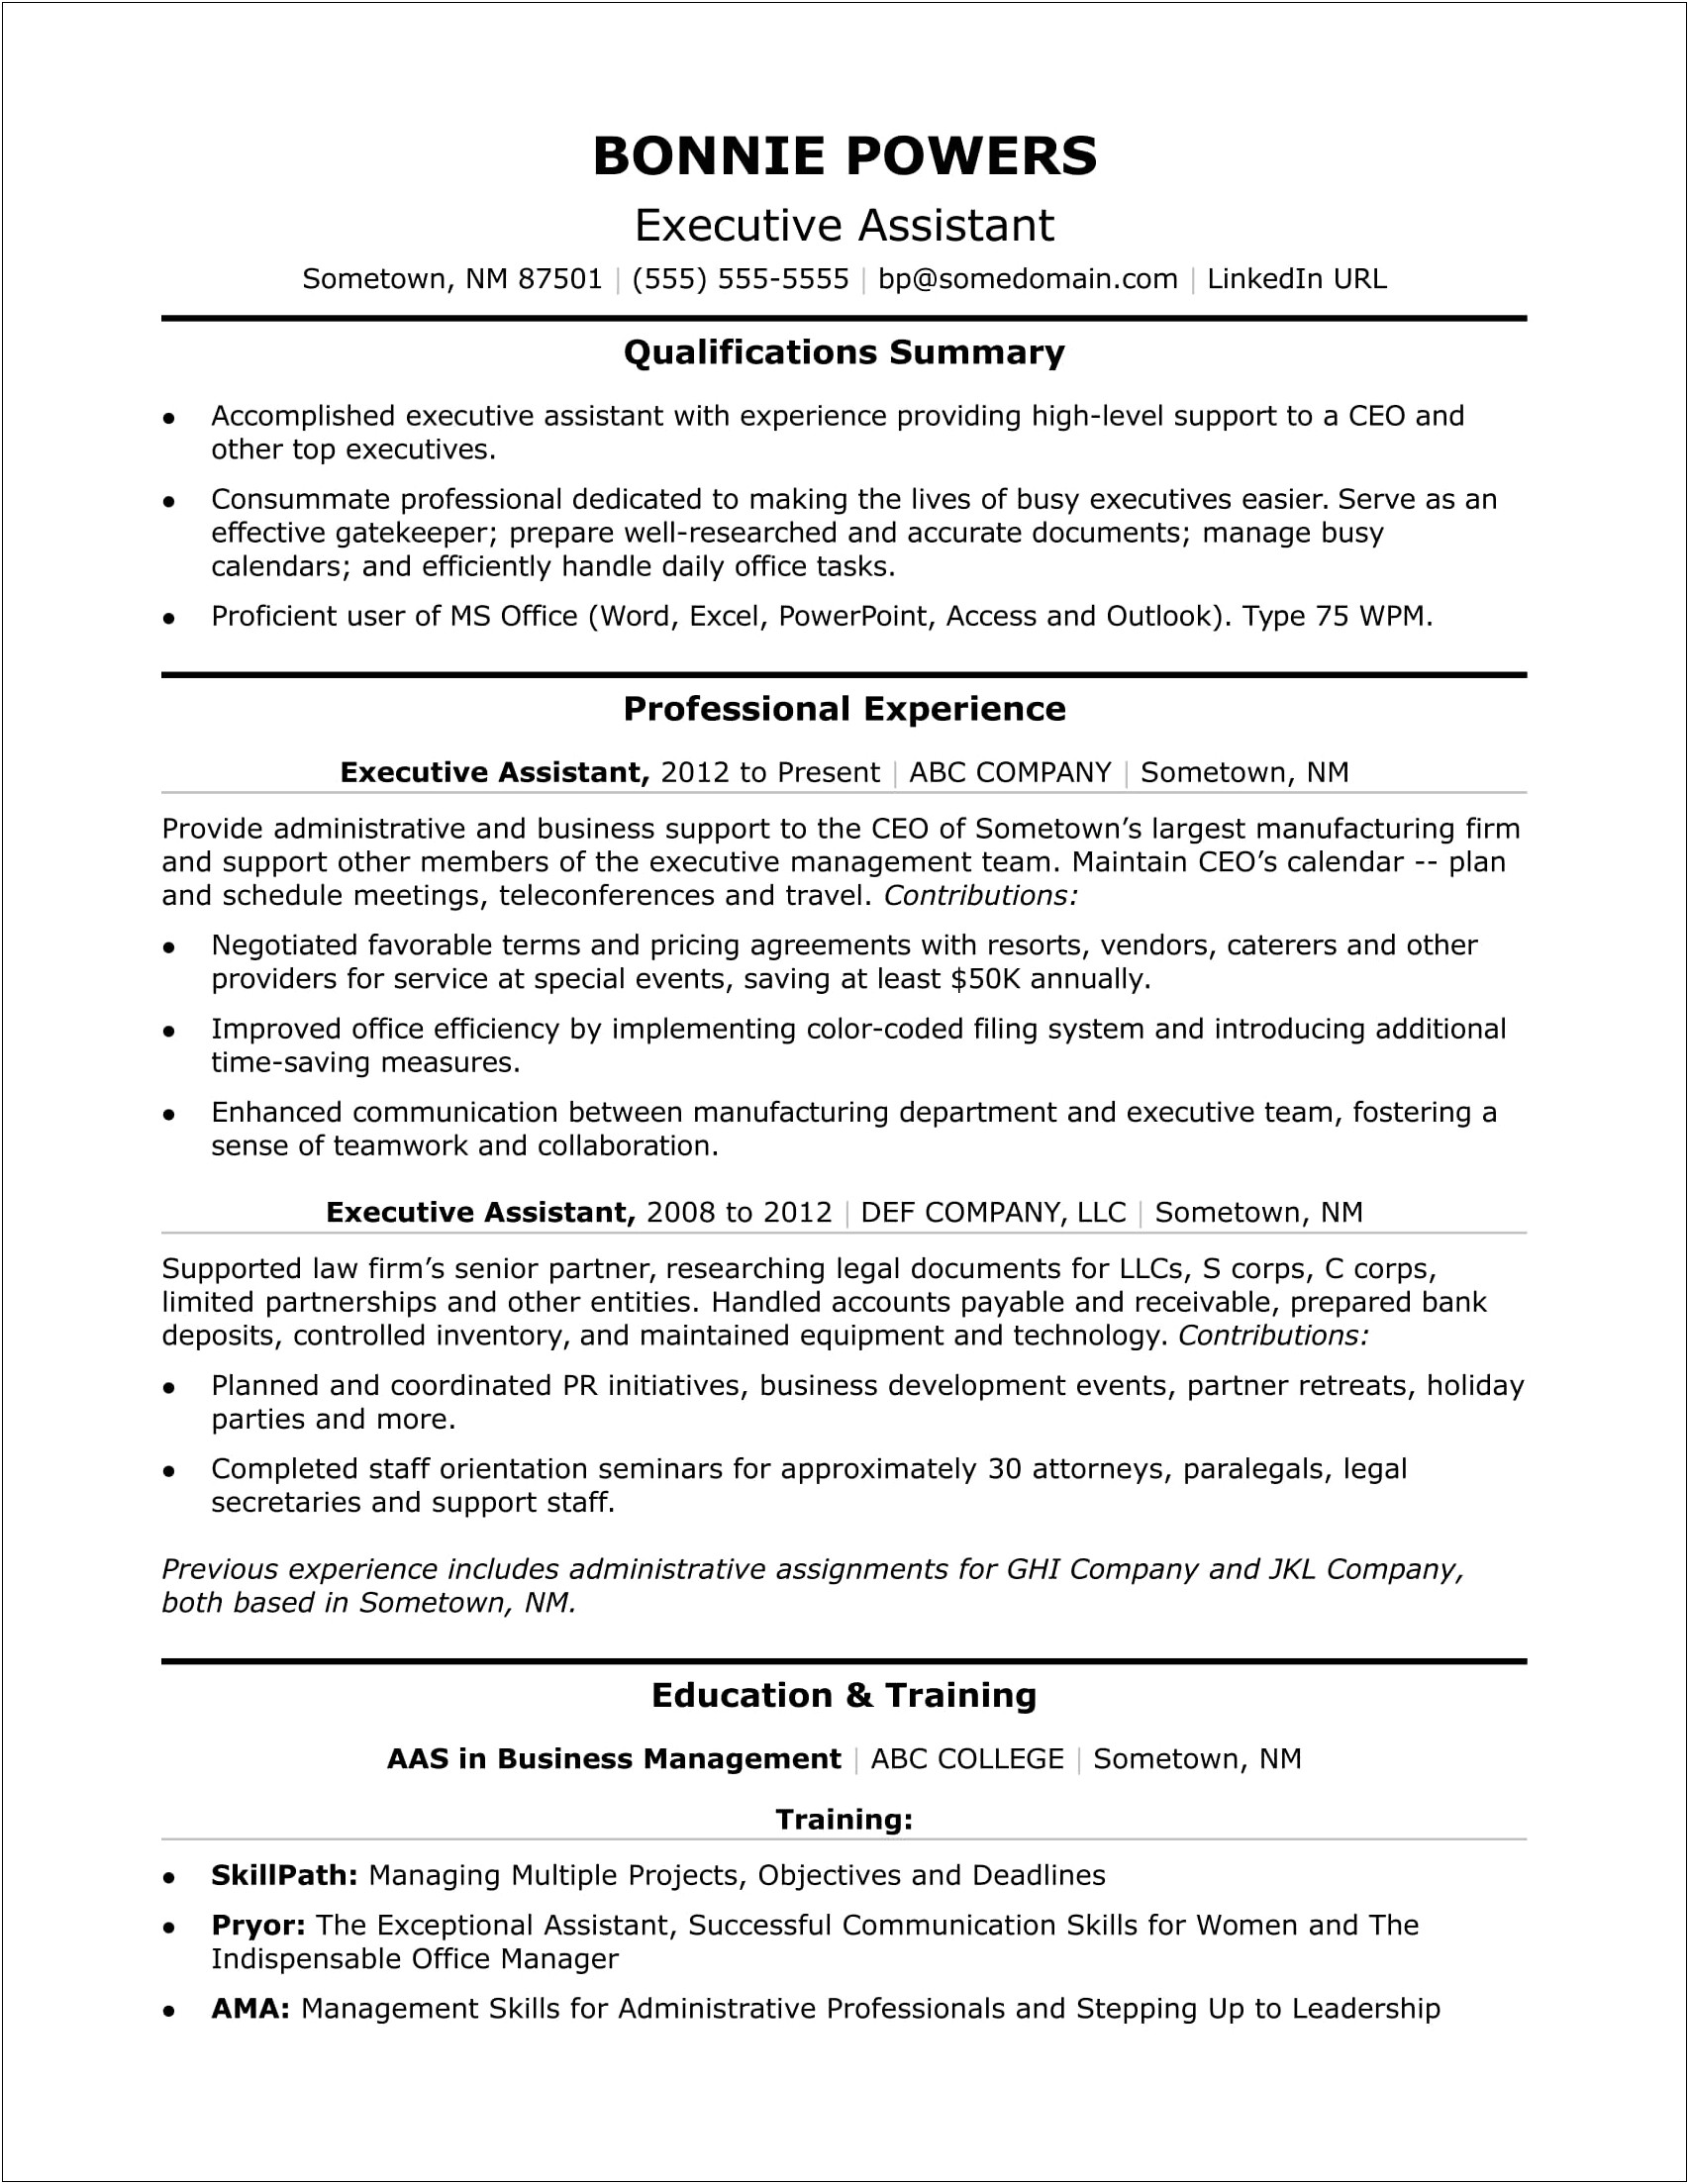 Examples Of Executive Assistant Resumes With Objective